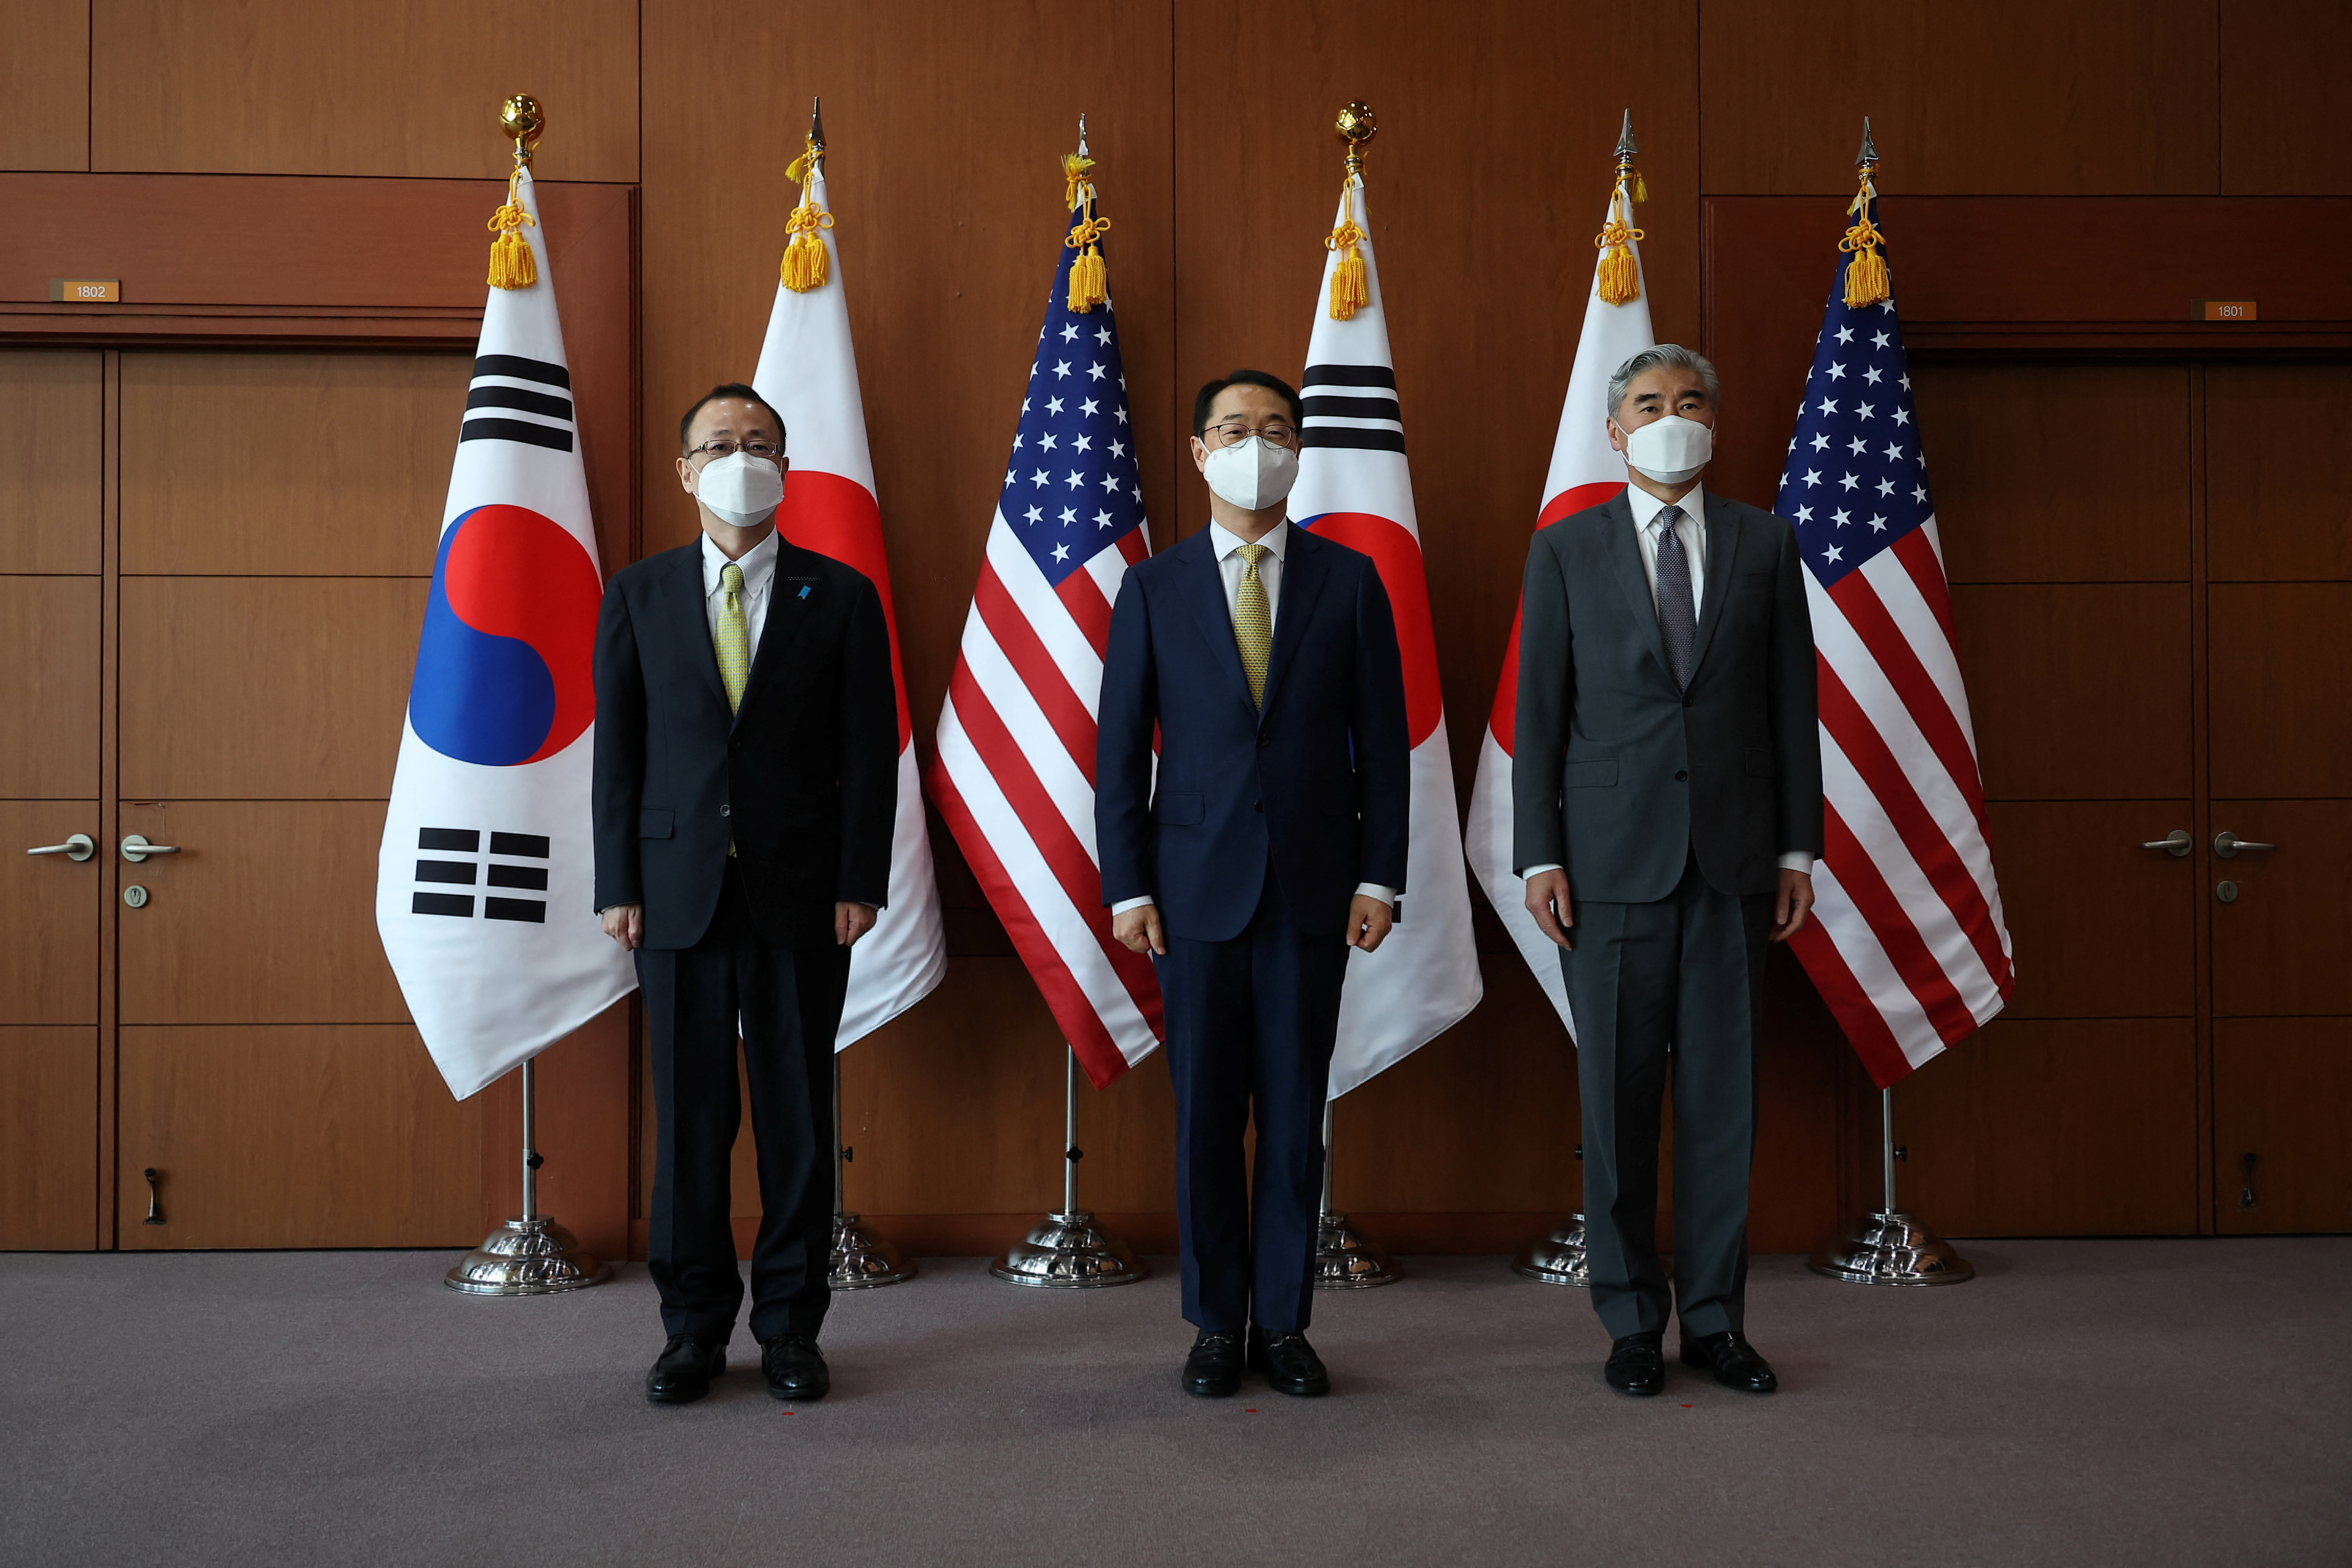 Kim Gunn, South Korea's new special representative for Korean Peninsula peace and security affairs, his U.S. counterpart Sung Kim and Japanese counterpart Takehiro Funakoshi arrive for their meeting at the Foreign Ministry in Seoul